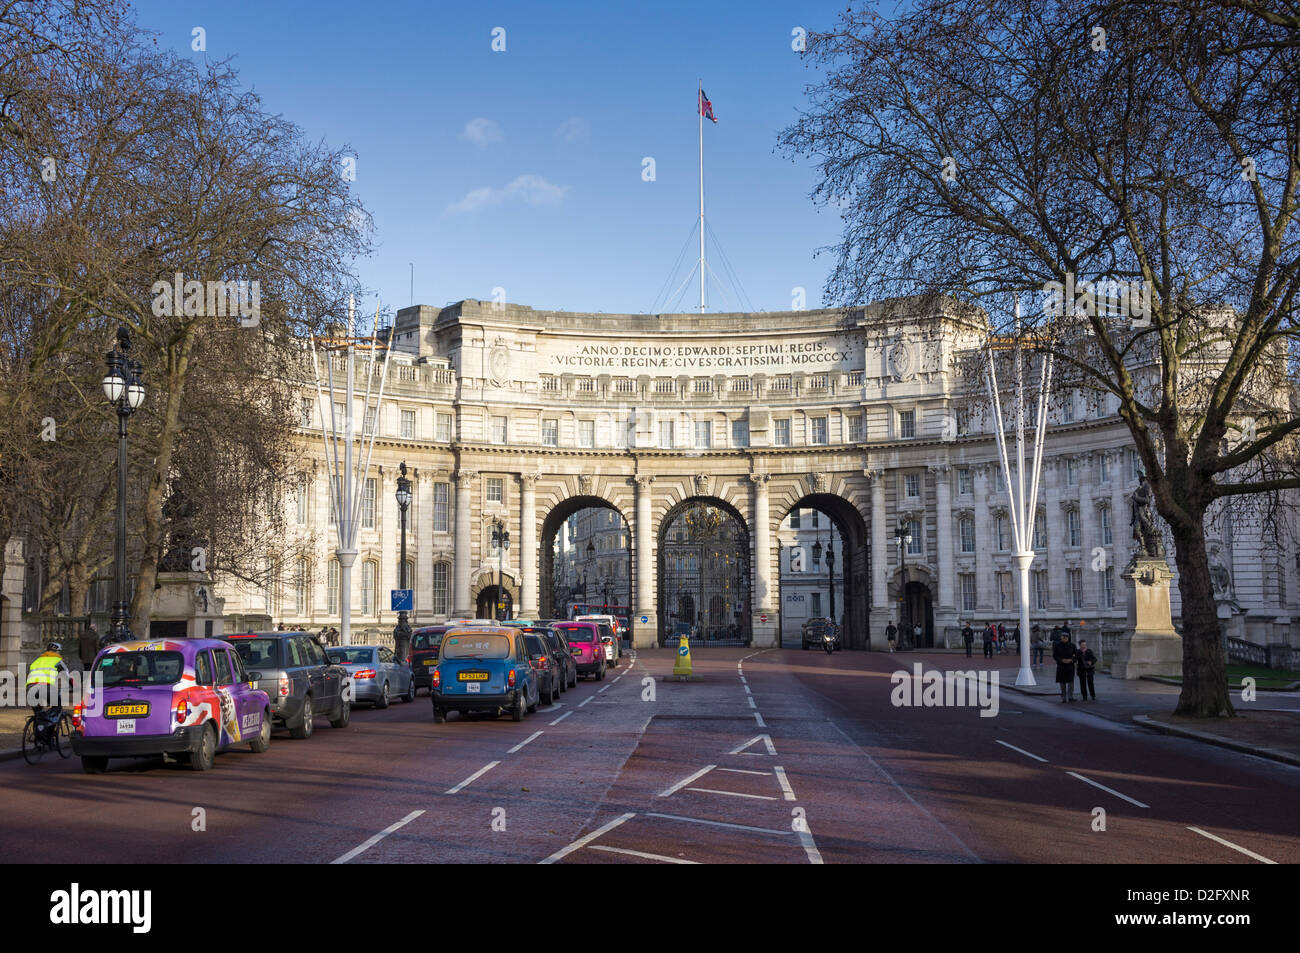 L'Admiralty Arch et le Mall, Londres, Angleterre, Royaume-Uni Banque D'Images